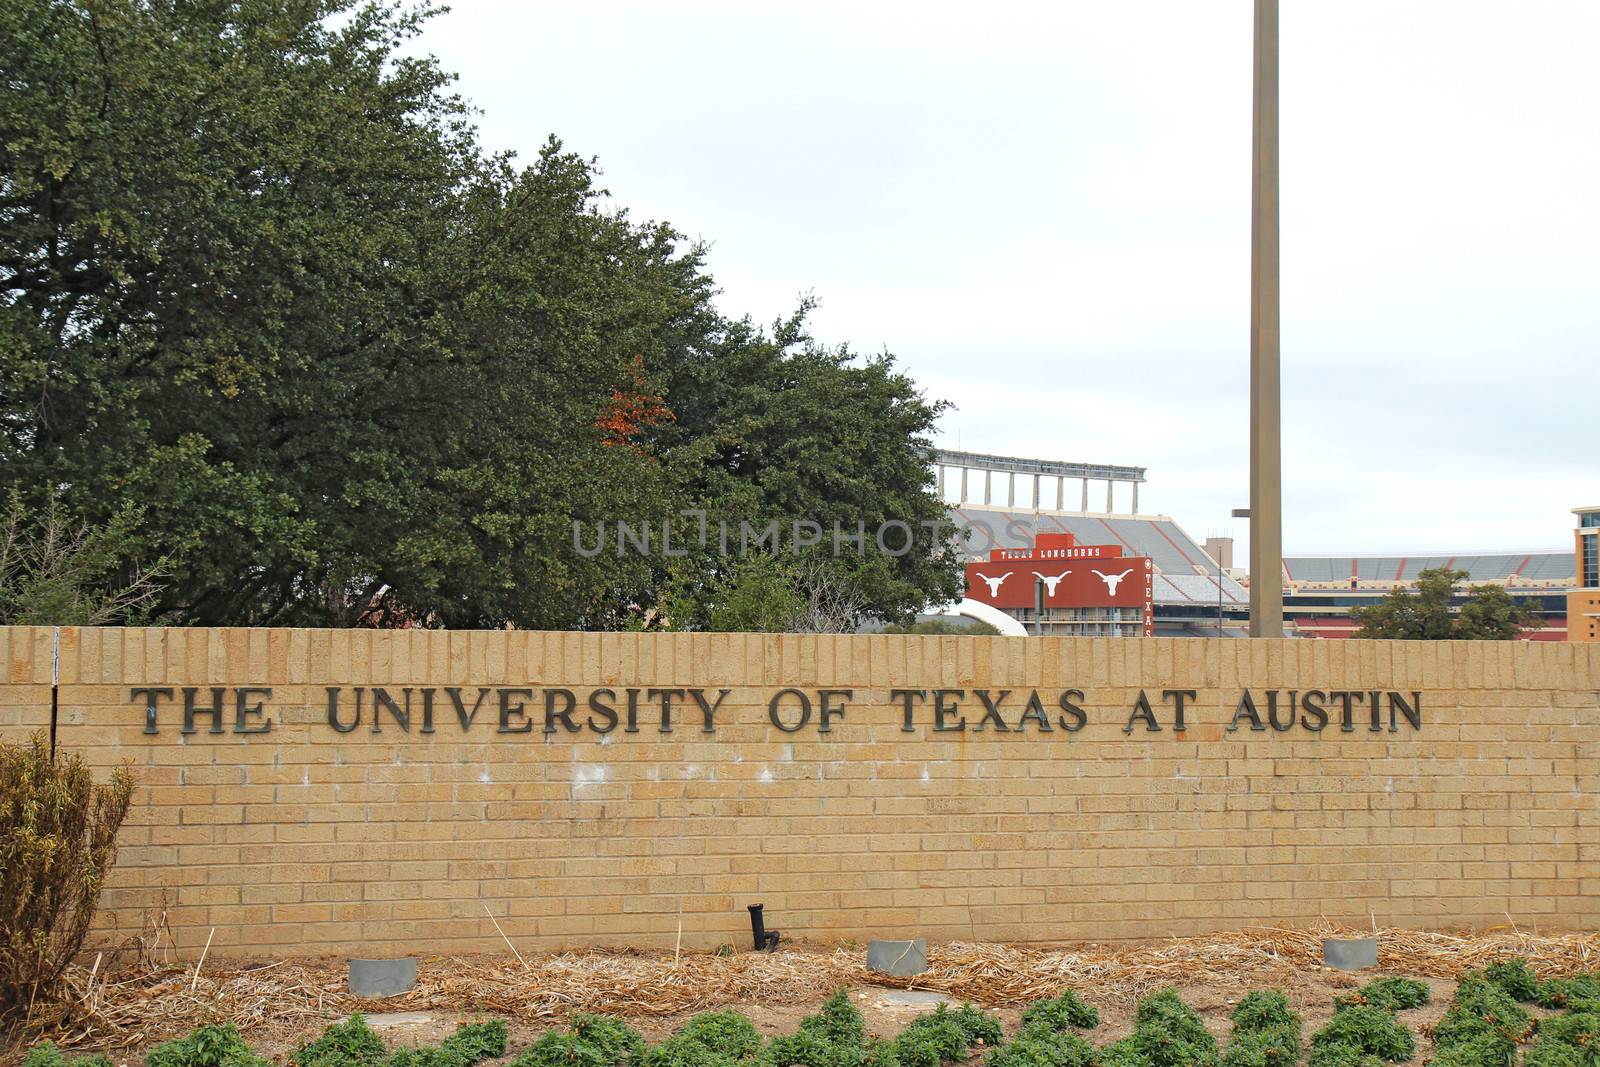 Sign for the University of Texas at Austin and stadium by sgoodwin4813